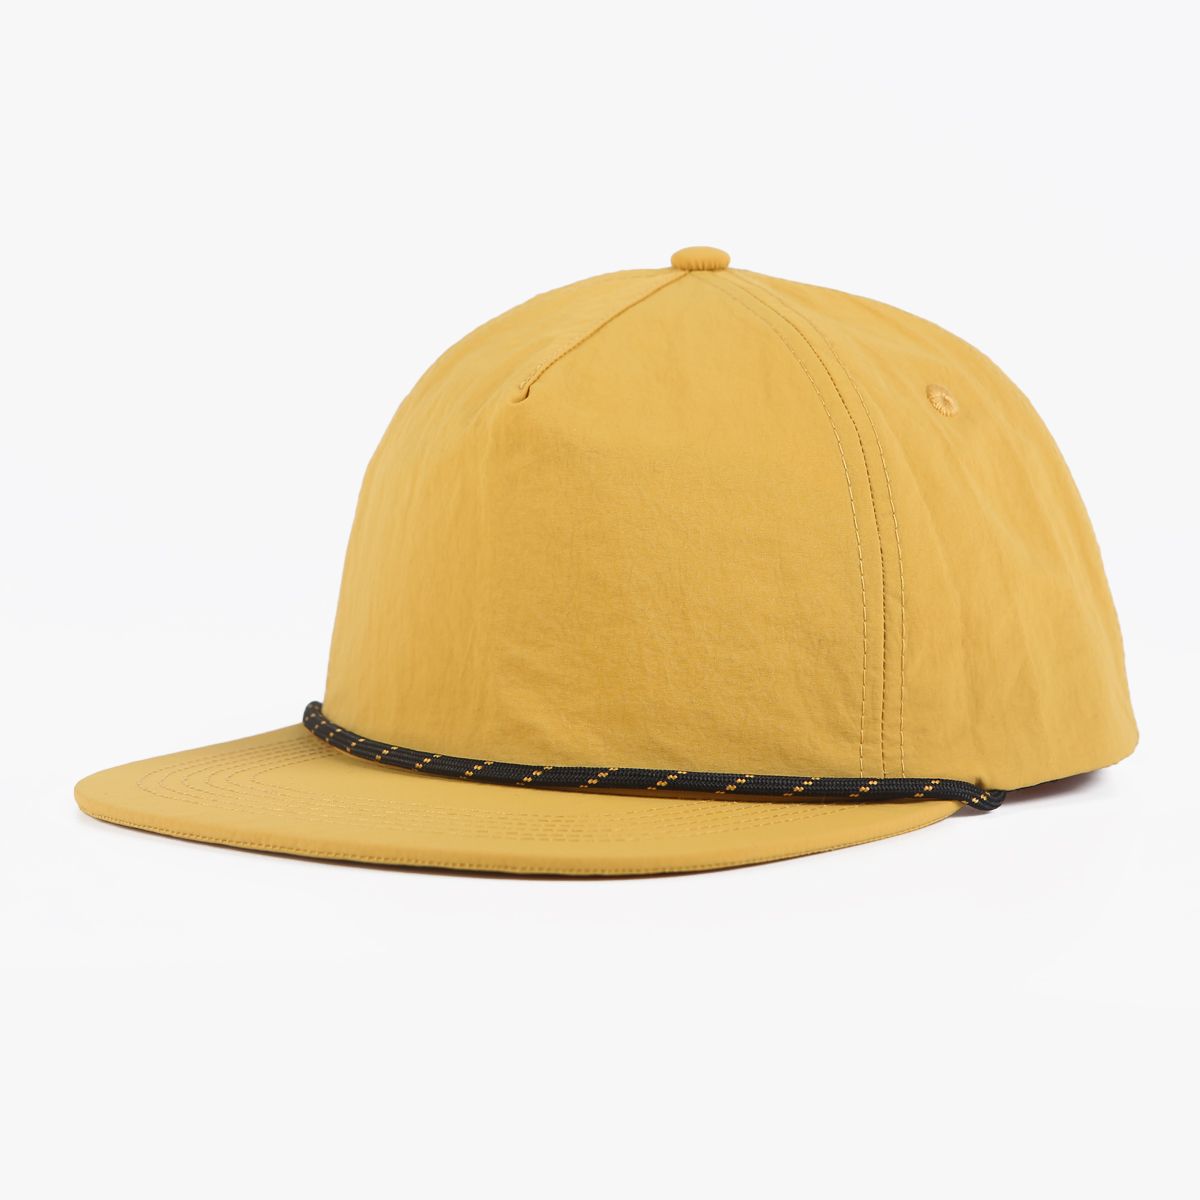 Yellow Fin Rope Snapback – Keepers Only Co.